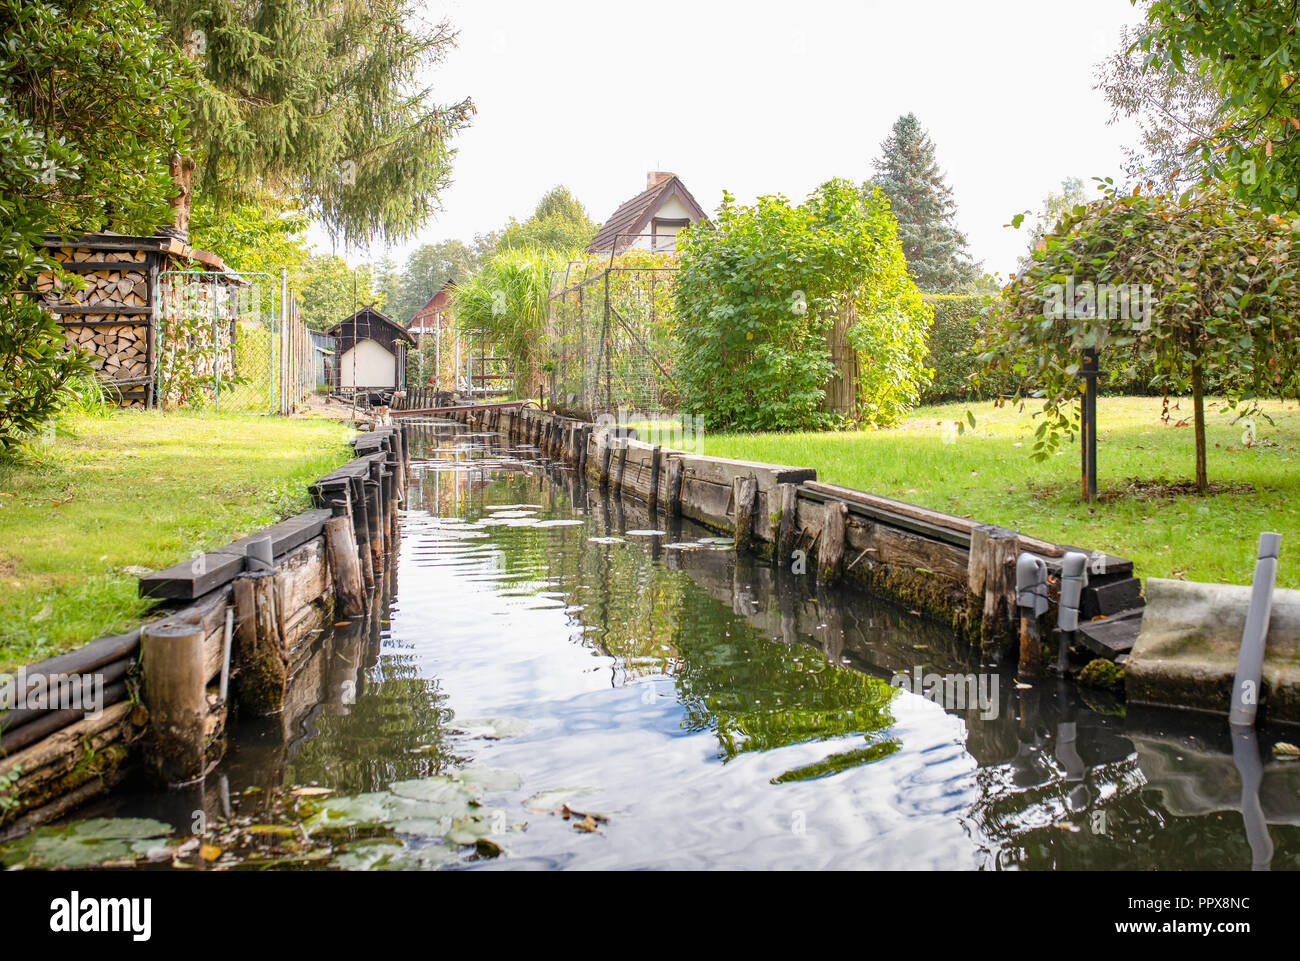 Lehde, Spreewald / Germany.  Typical Spreewald landscape. Canals, vivid plants and wooden architecture. Stock Photo